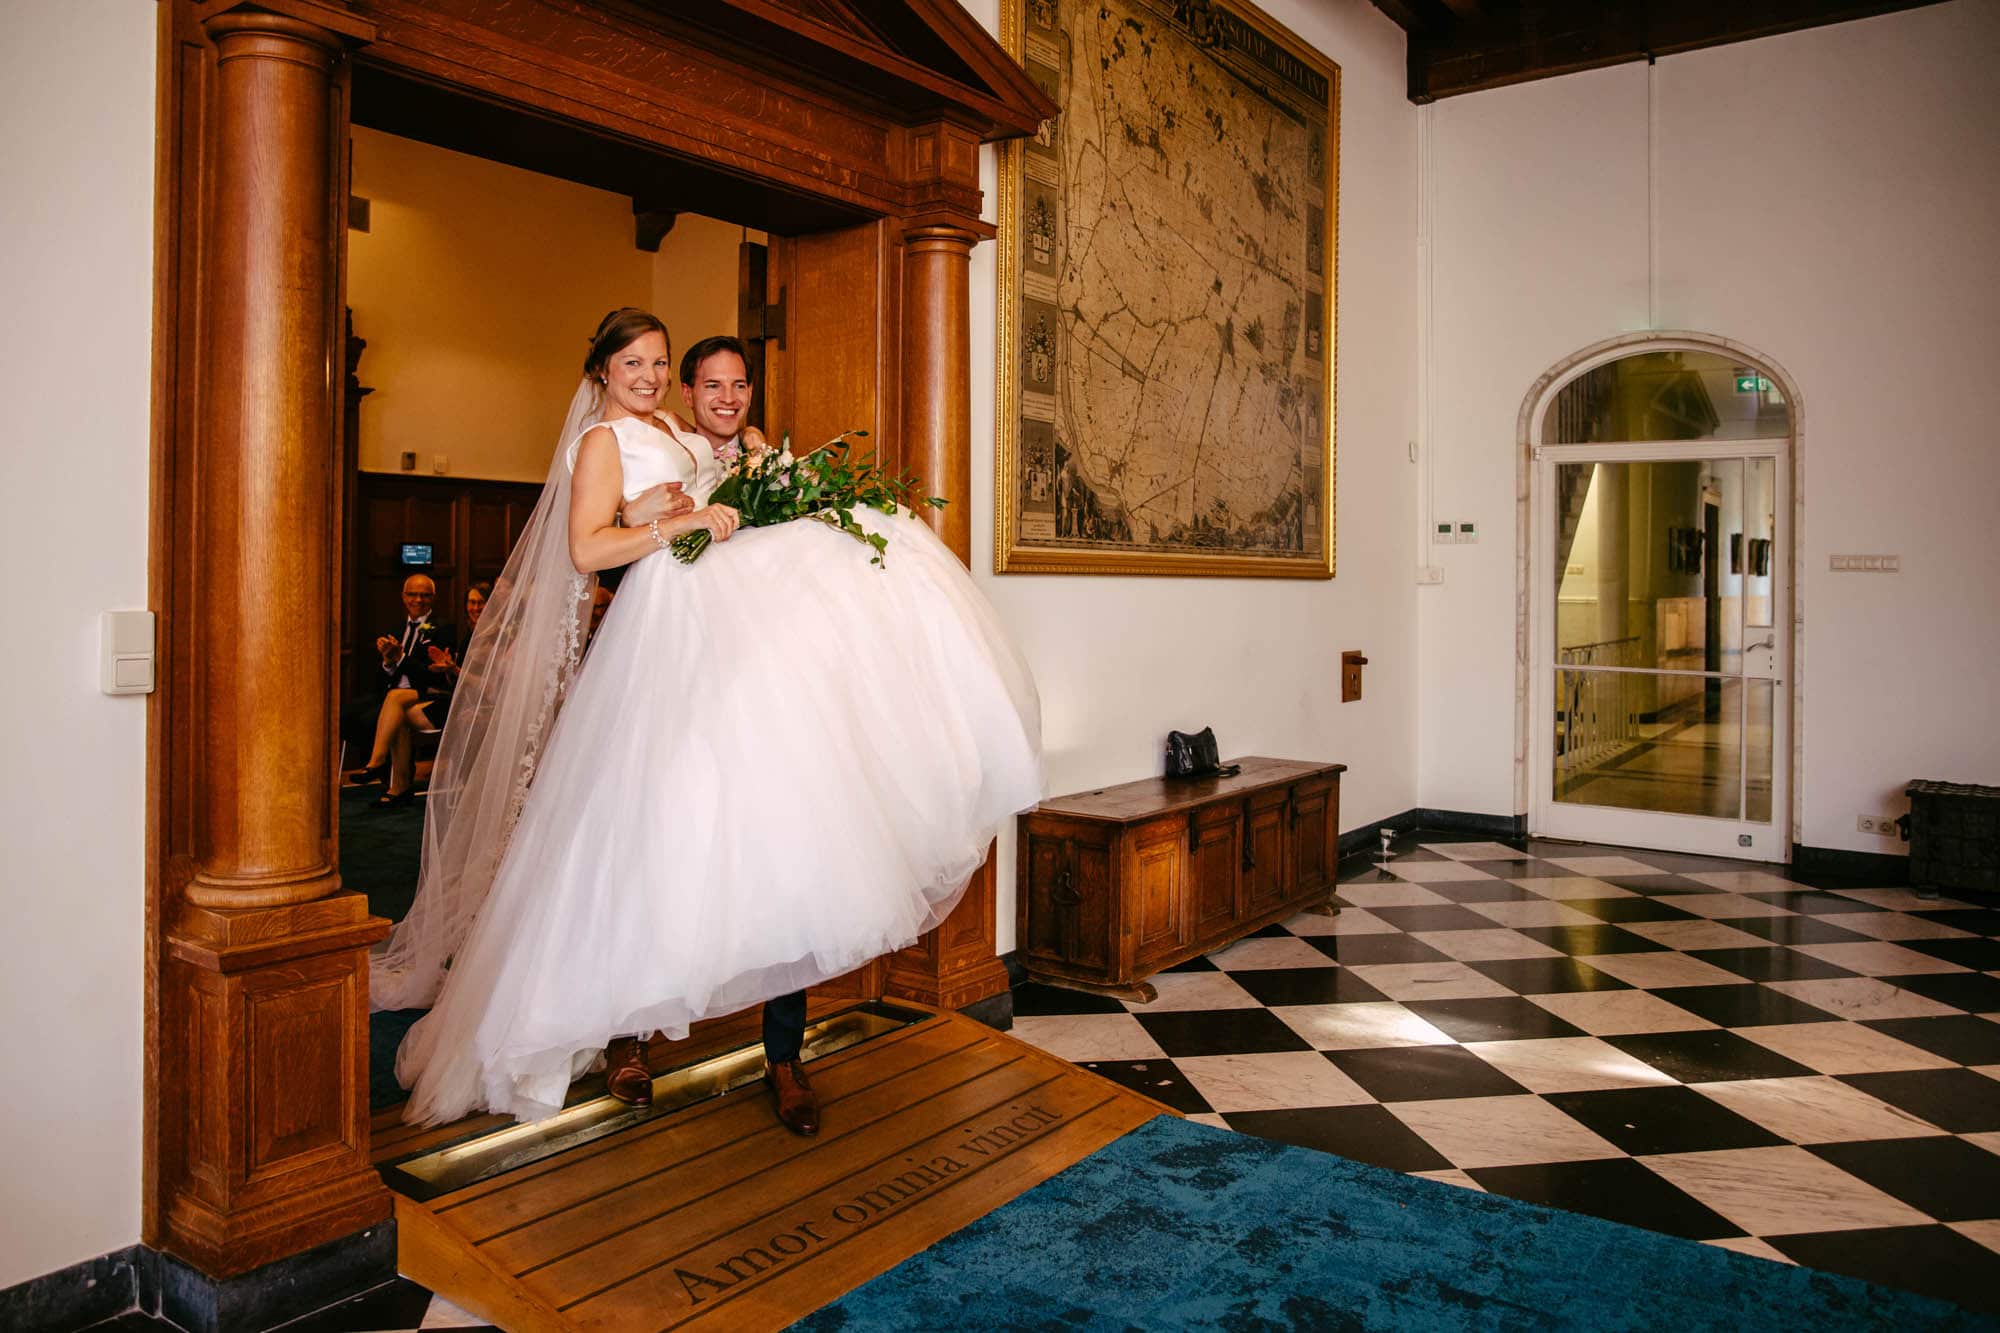 A bride carries her wedding dress into a room.